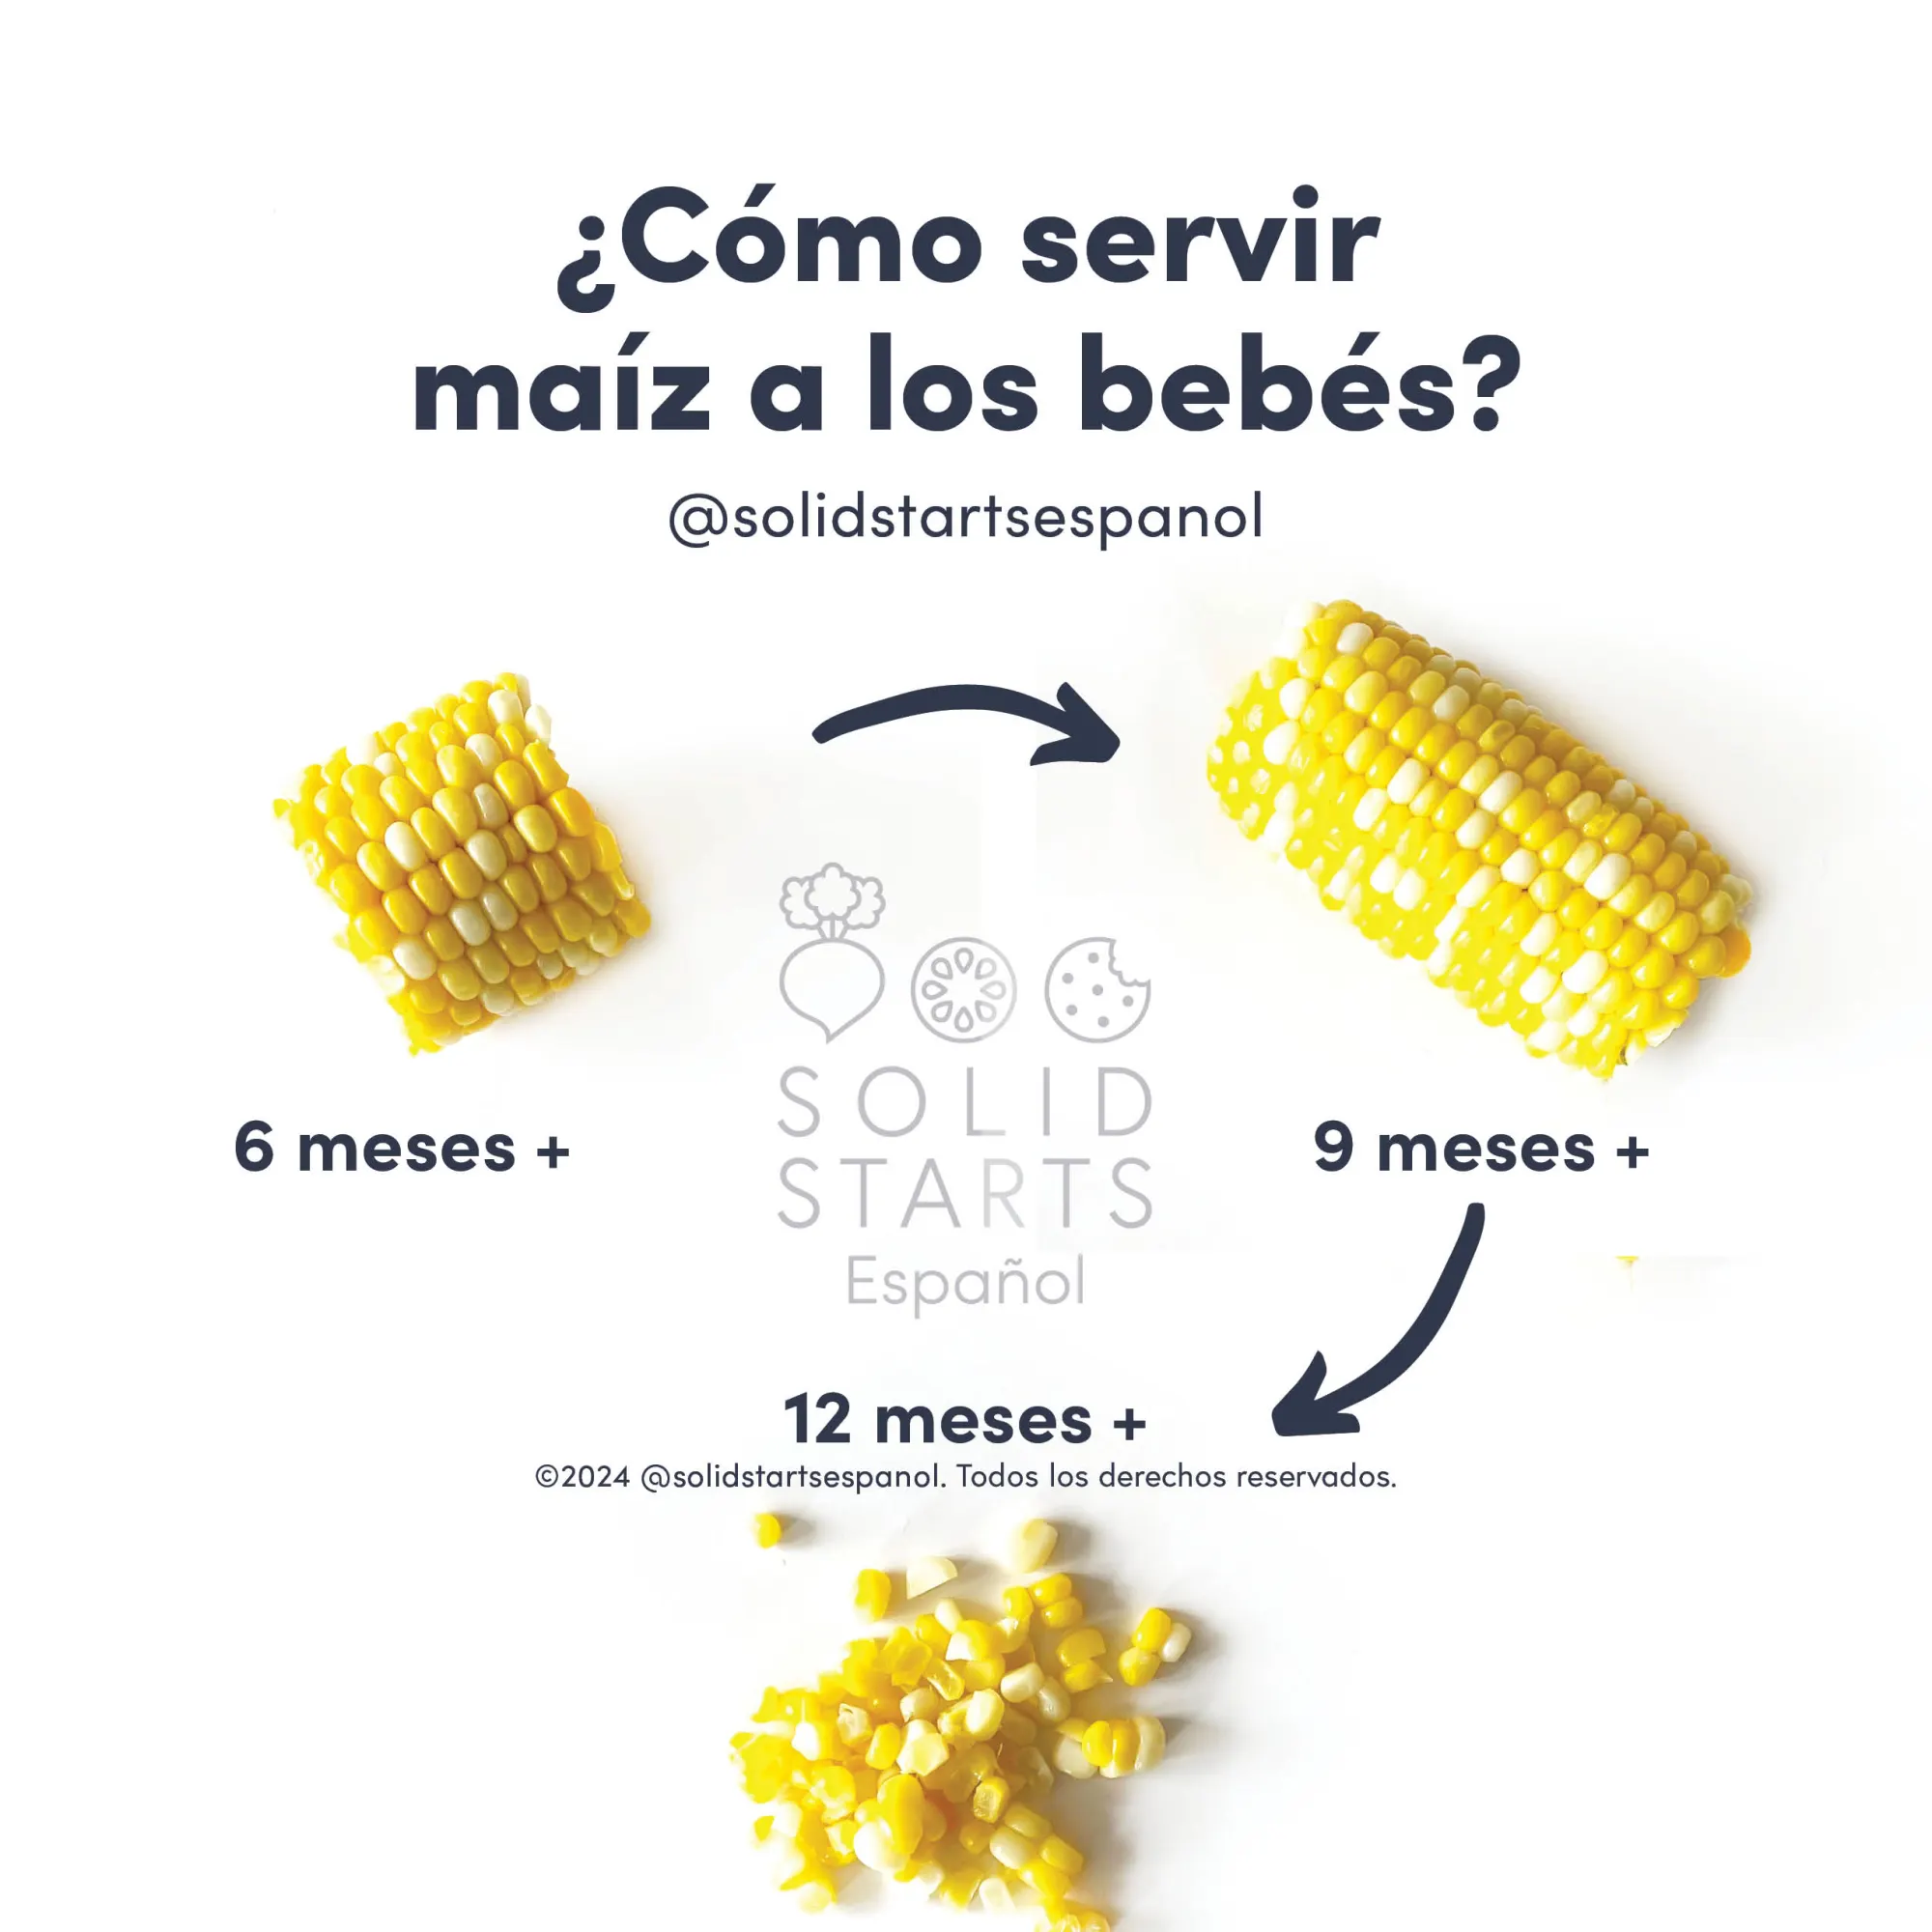 a Solid Starts infographic with the header How to Serve Corn to Babies: a small section of cob for 6-8 mos, a larger section for 9 months+, and loose kernels for 12 months+